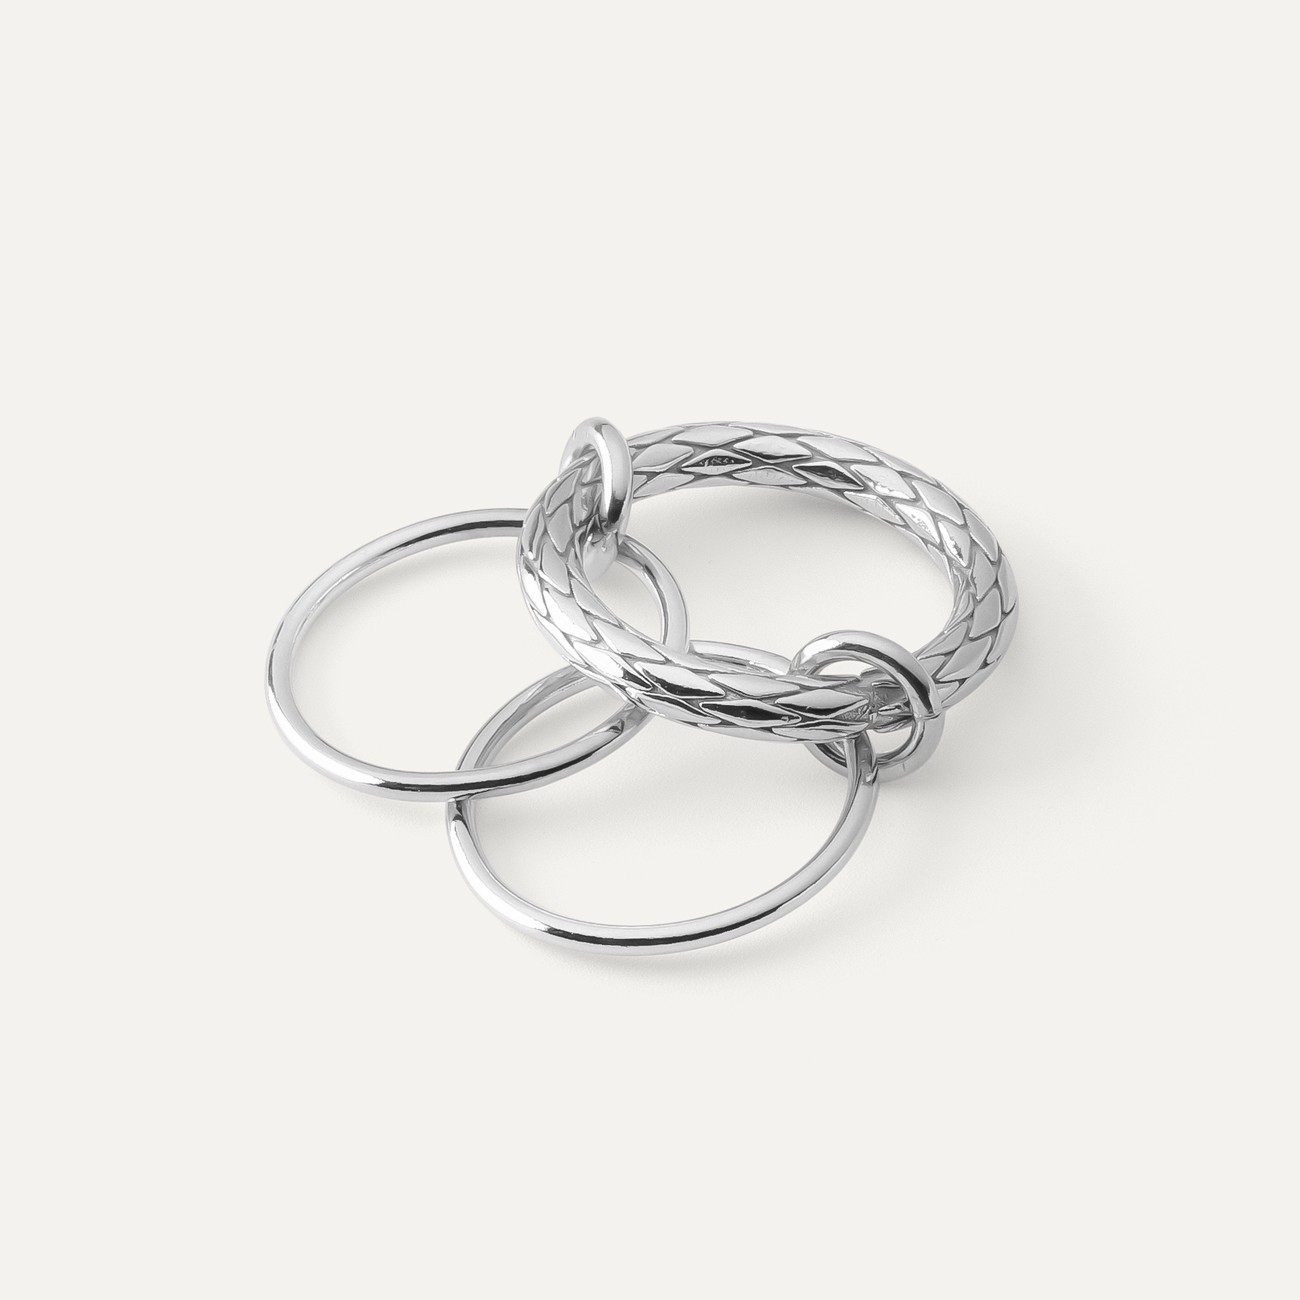 Oval ring, sterling silver 925, XENIA x GIORRE